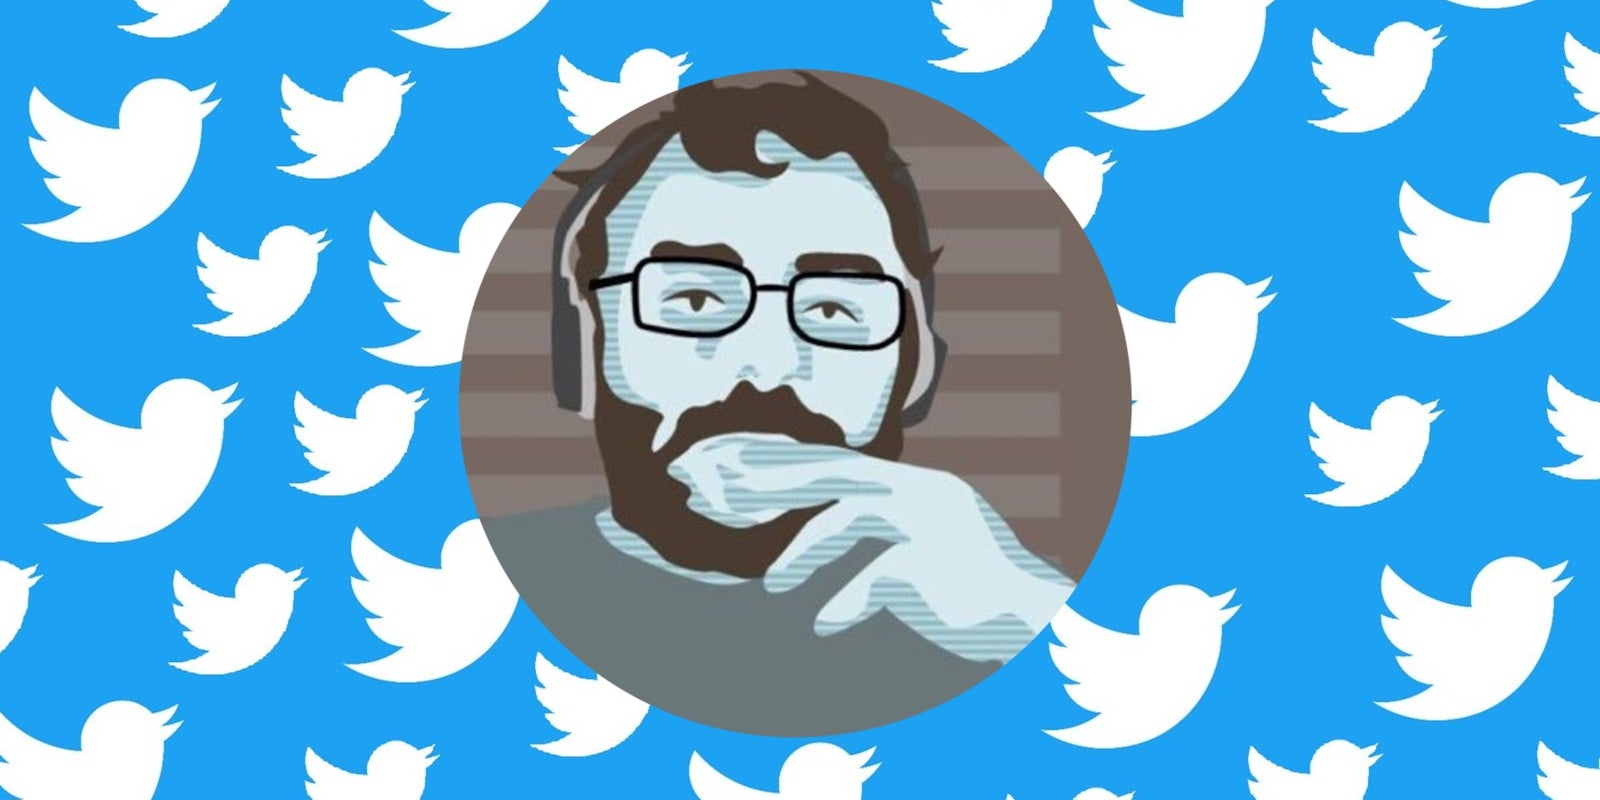 The Twitter profile of journalist Michael Tracey